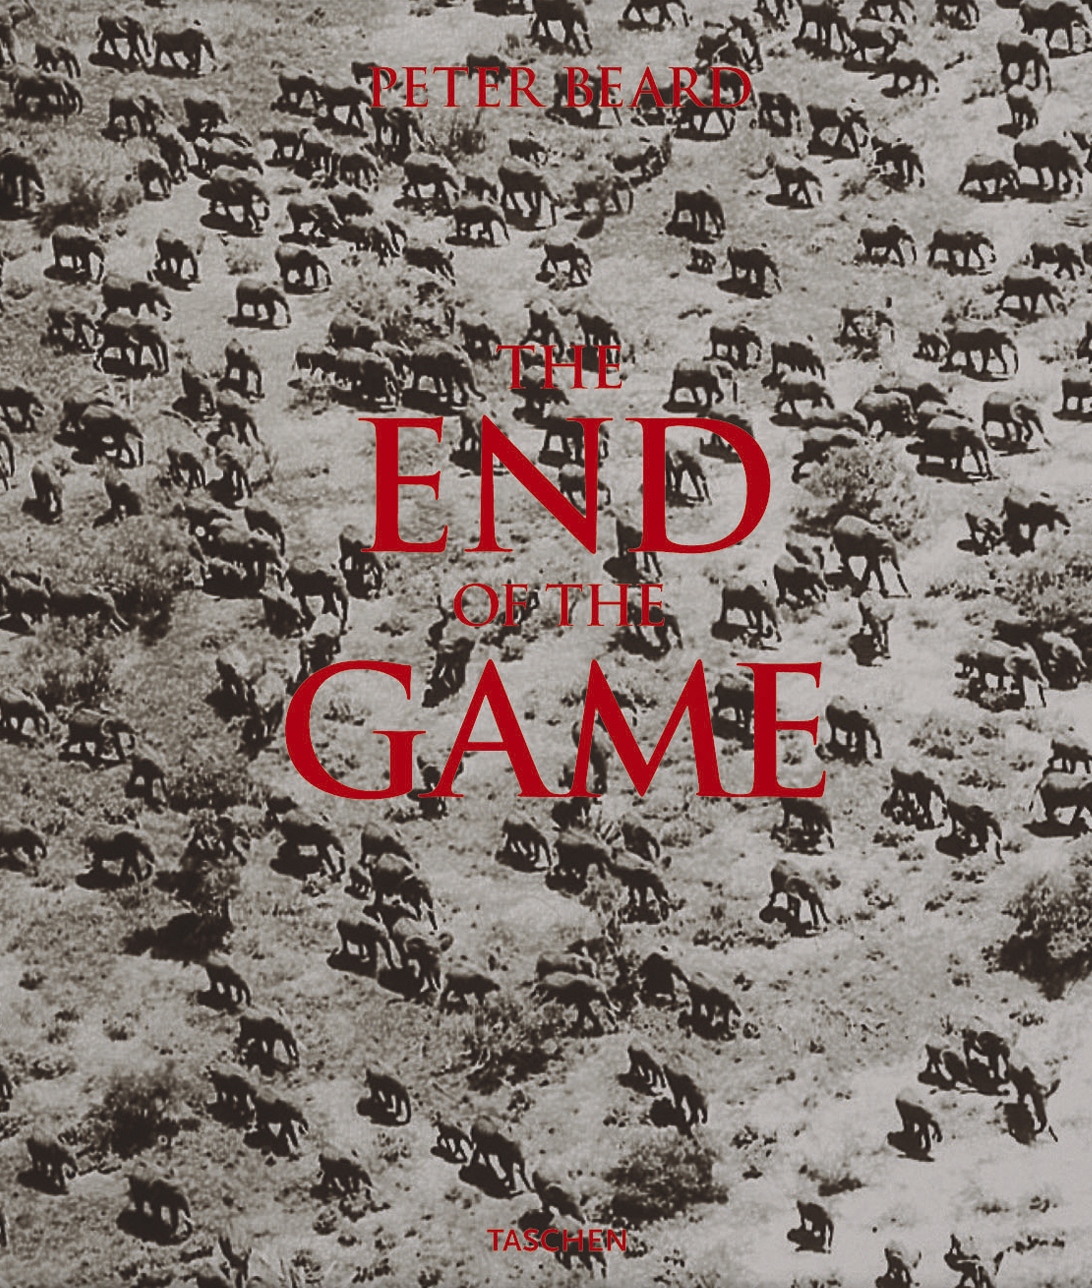 The End of the Game – Peter Beard Studio